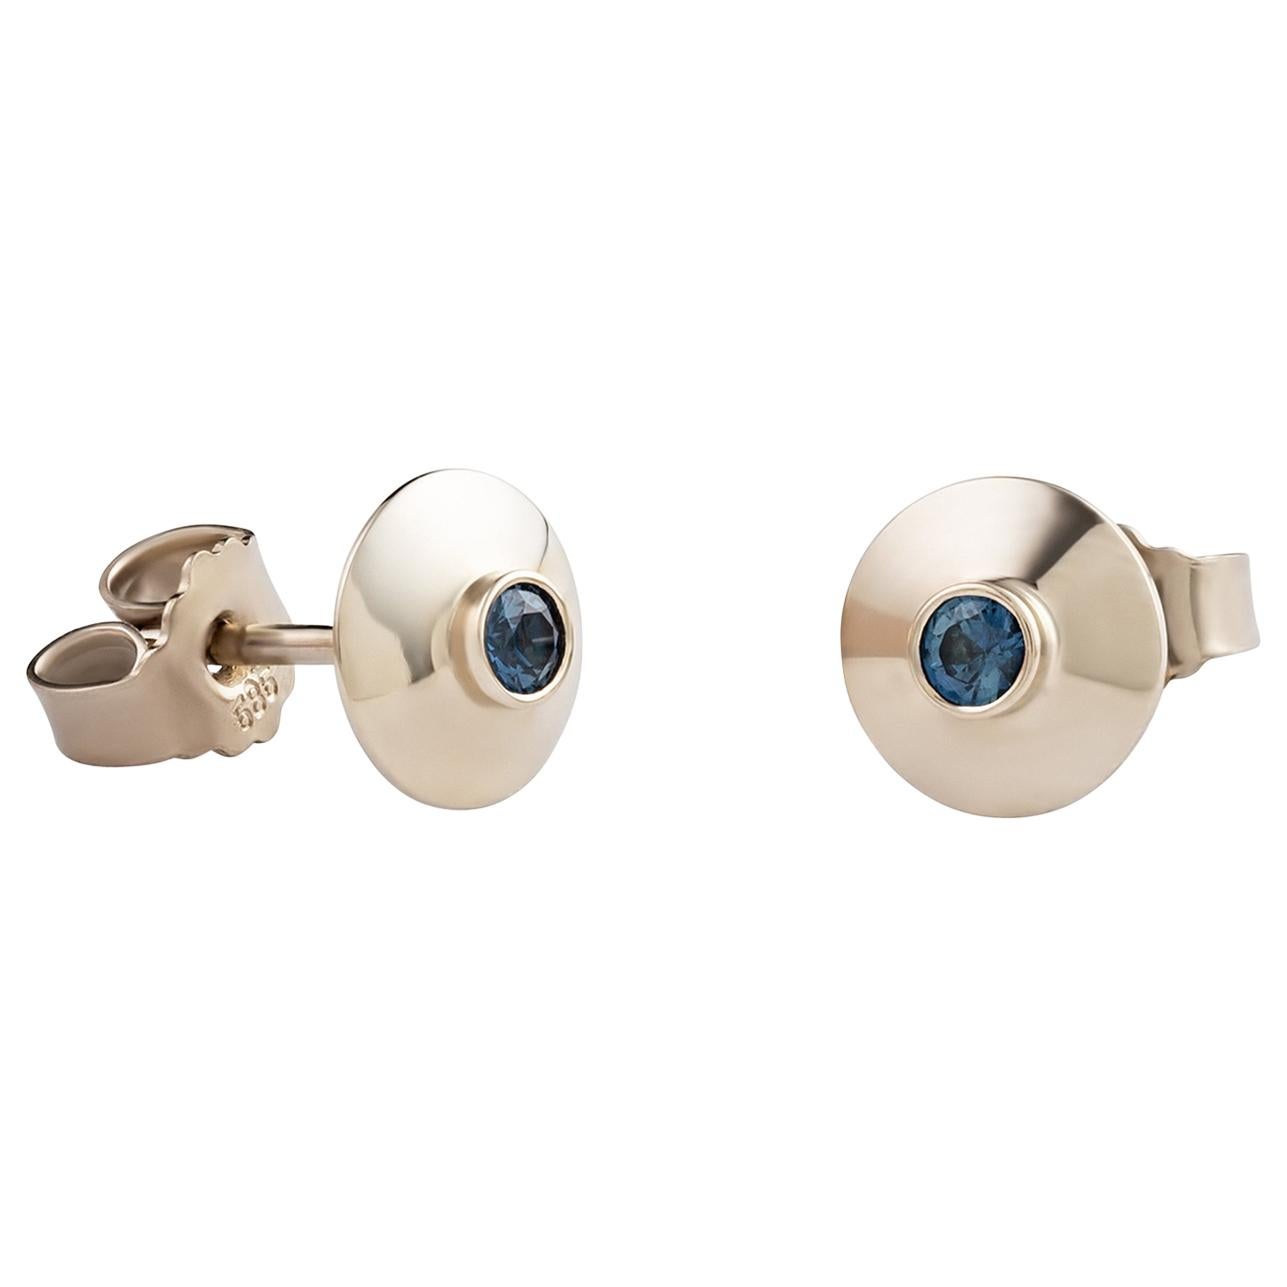 14 Karat White Gold Earrings “Saturn” with Sapphire For Sale